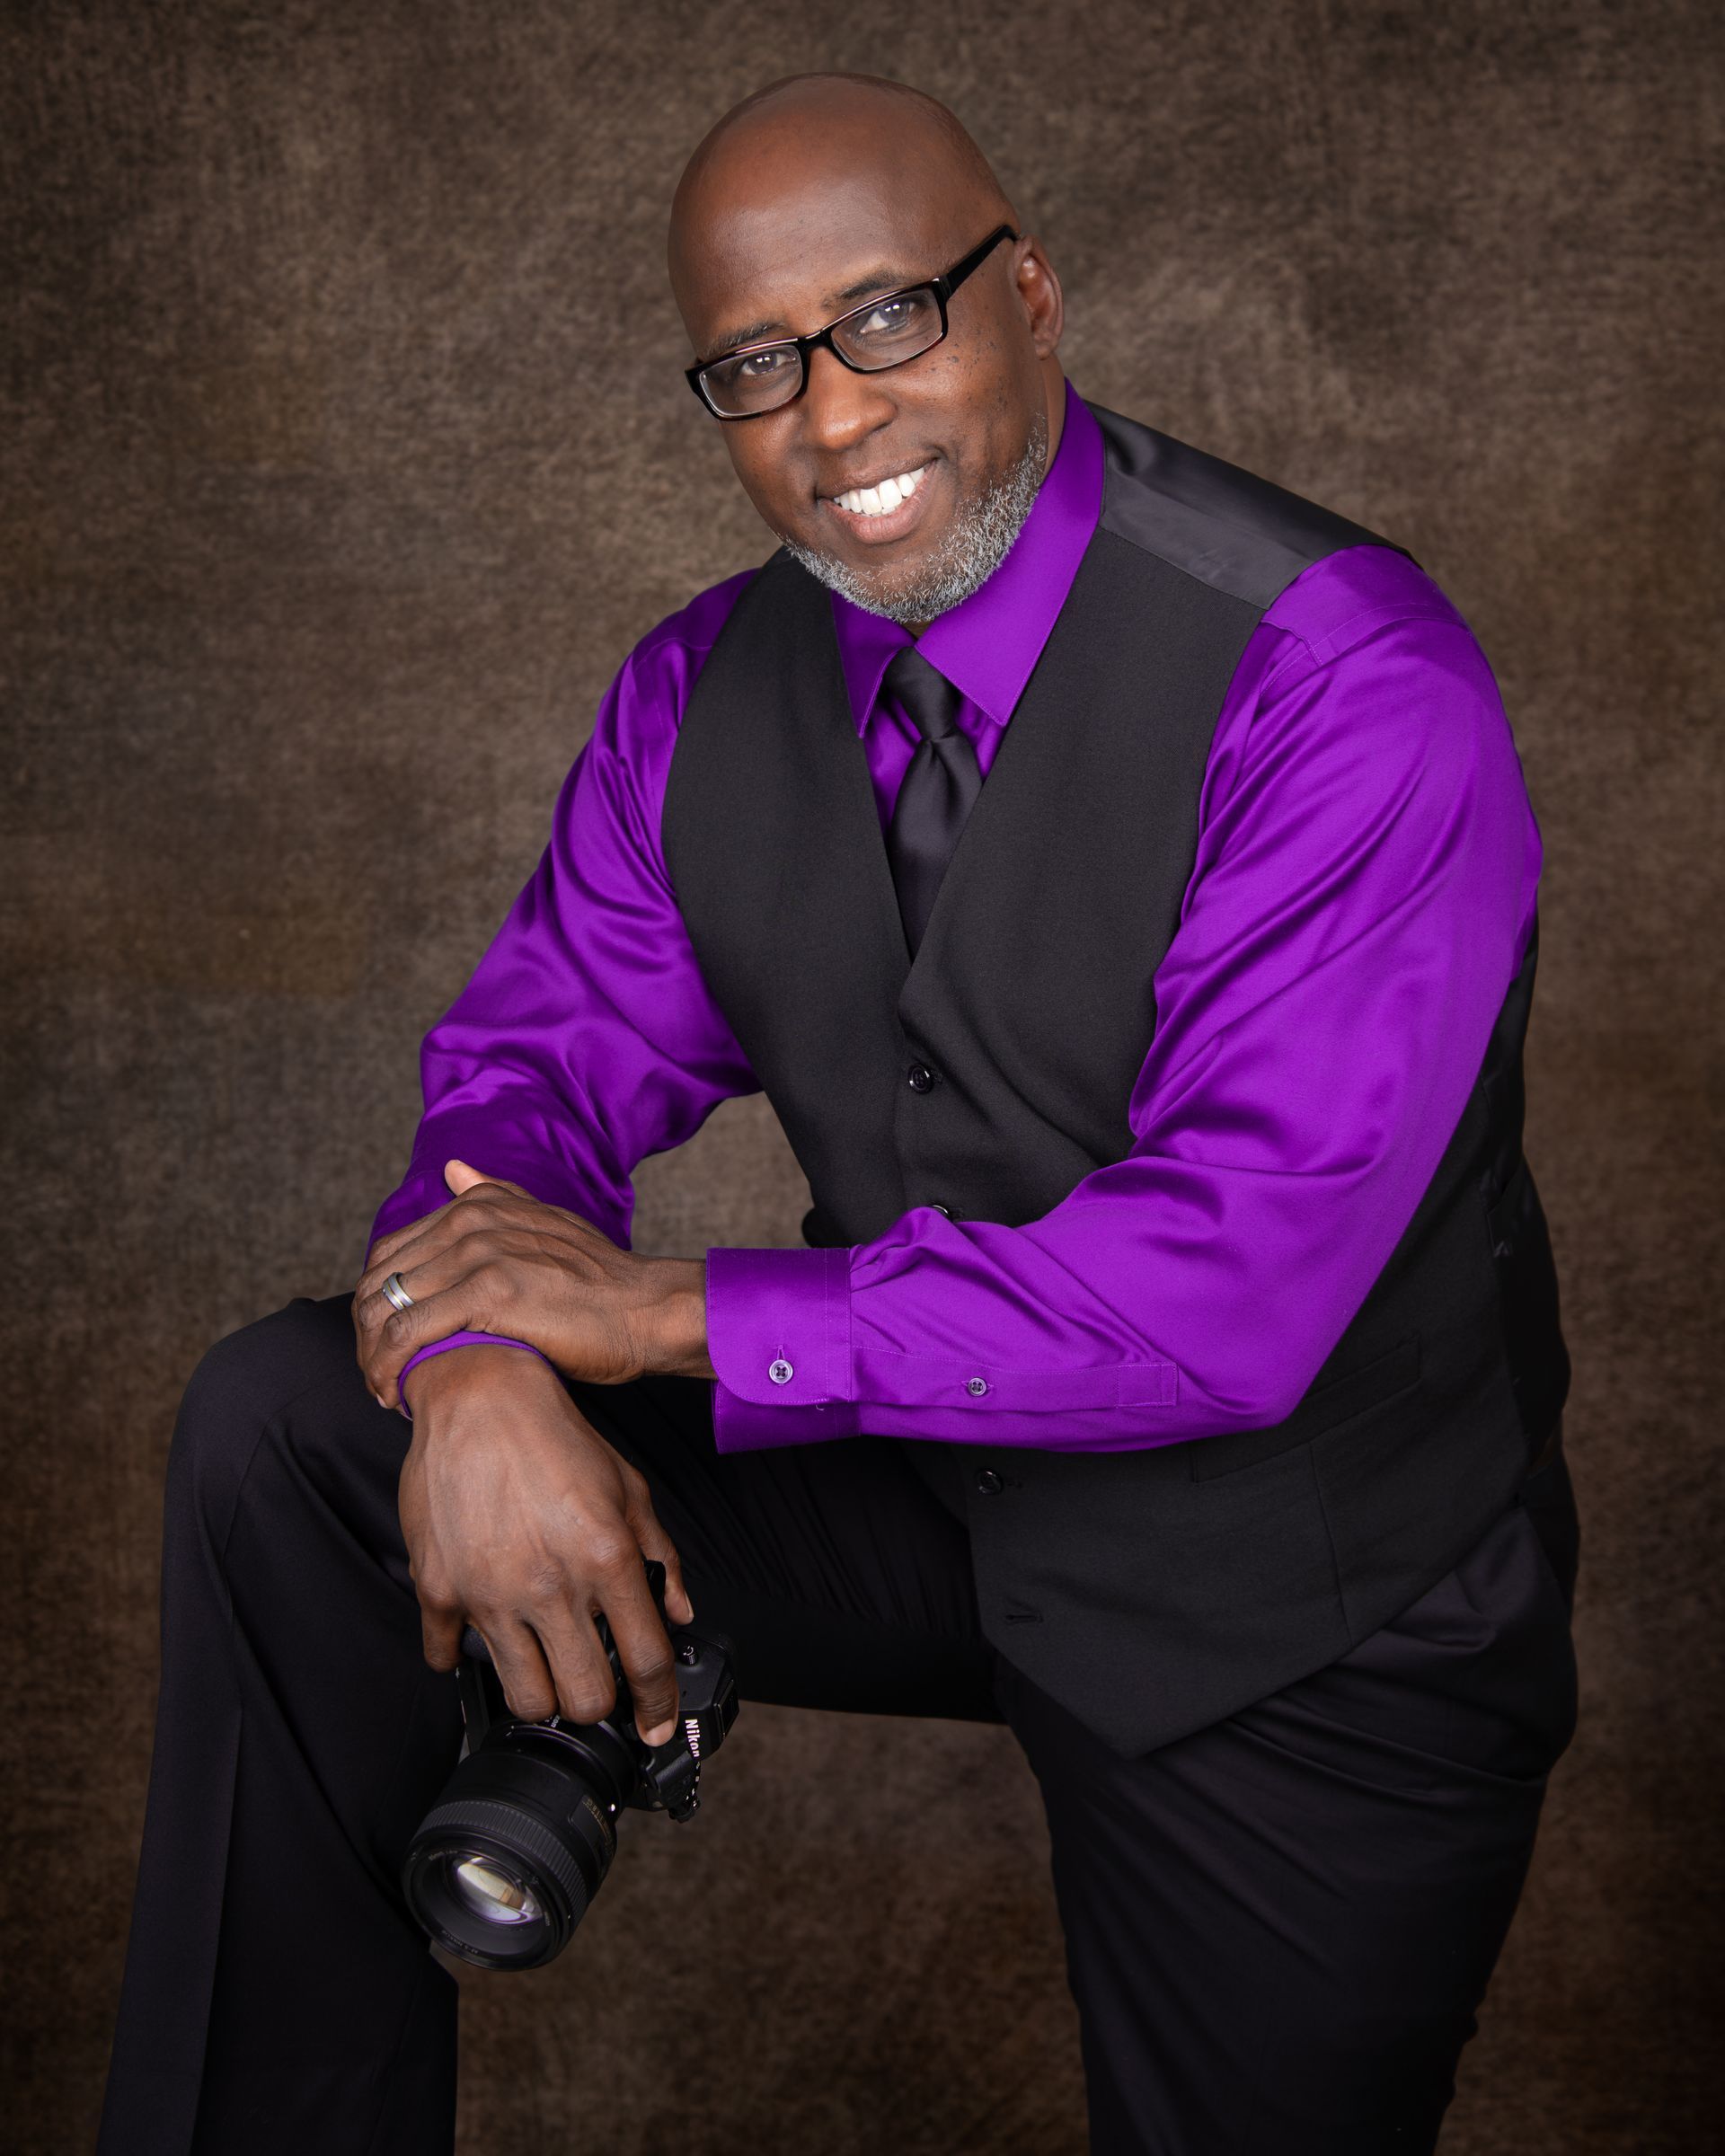 Selvin Walker, Junctions' Owner and Multimedia Specialist